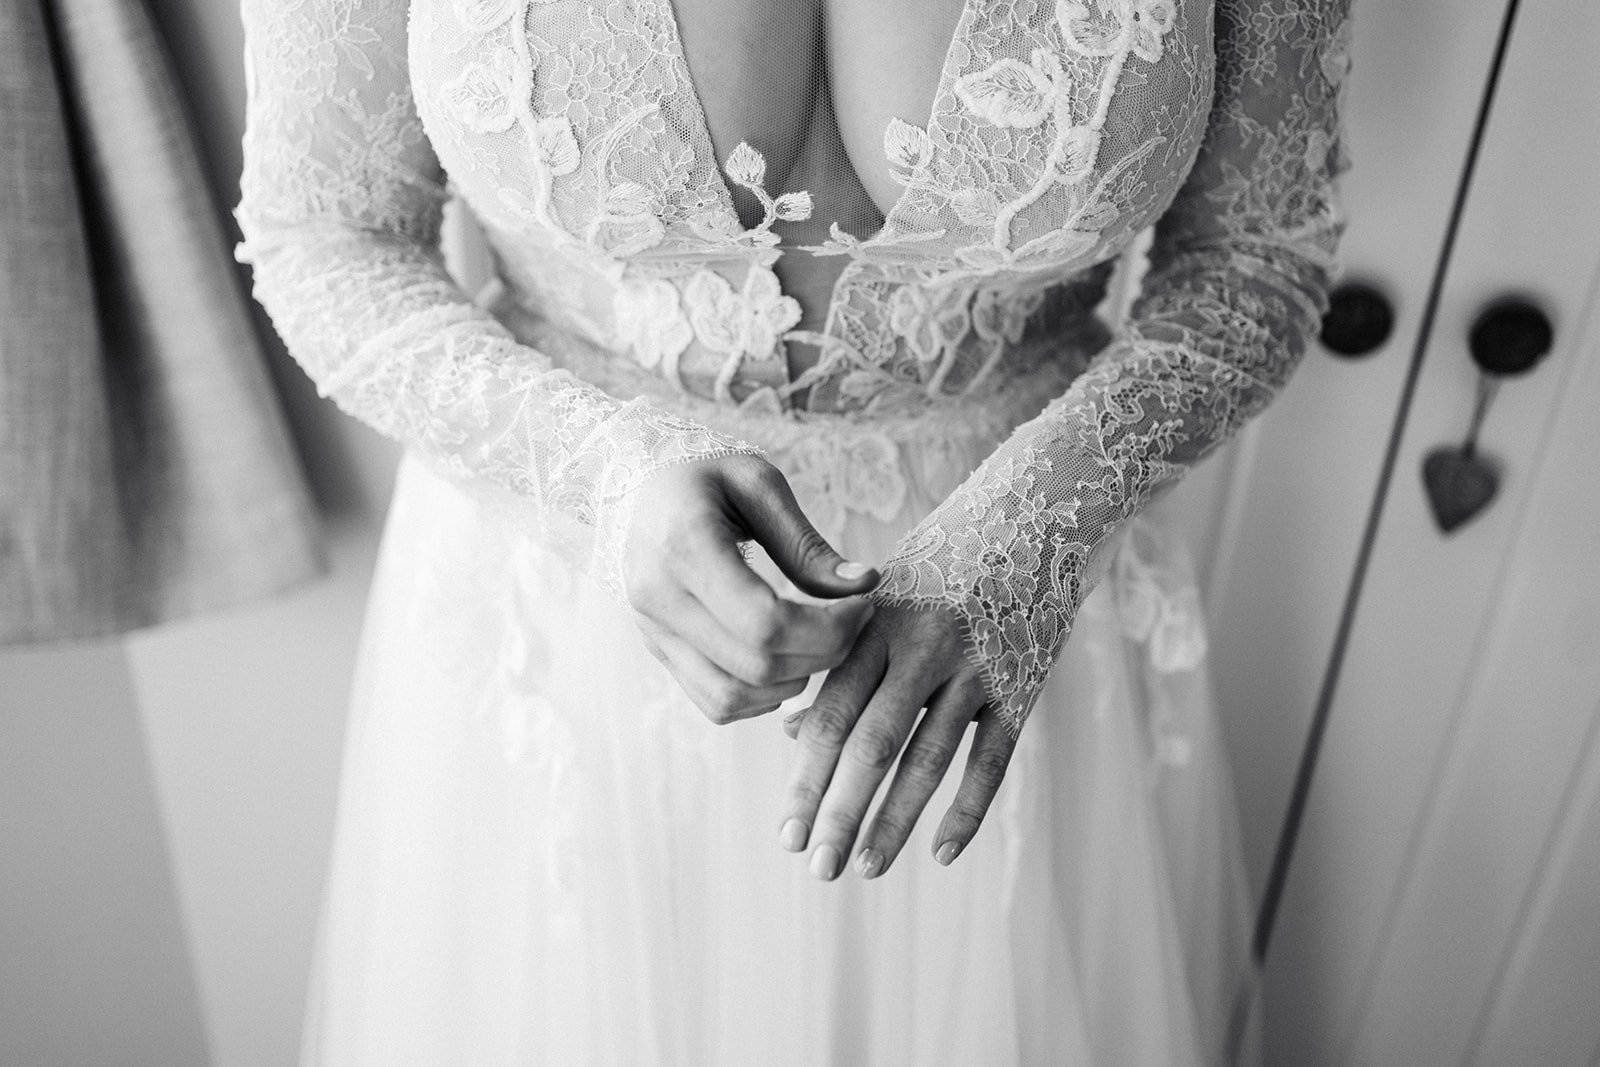 black and white image of a bride adjust8ing her lace wedding dress sleeves. the normans York wedding